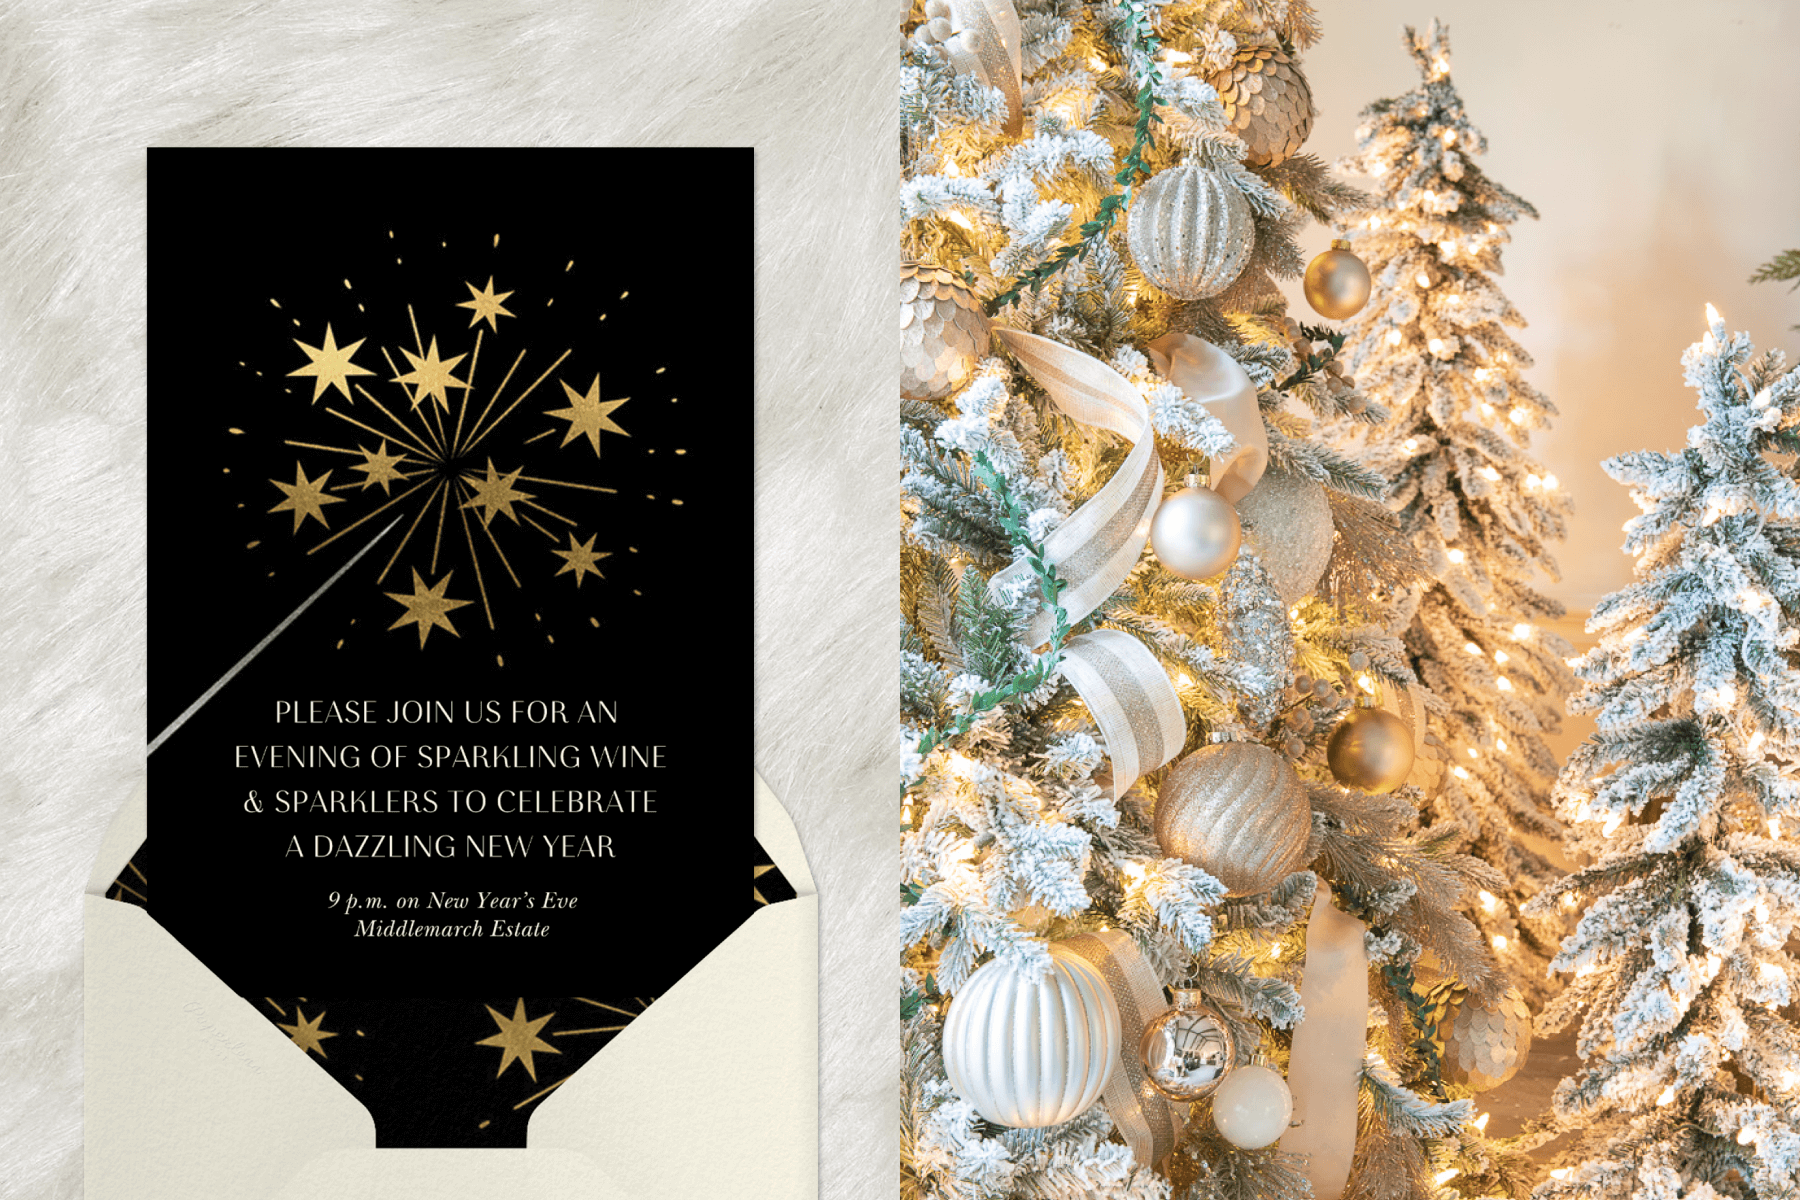 Left: A black and gold New Year’s Even invitation featuring an illutration of a sparkler with stars; Right: Christmas trees decorated in fake snow and silver and gold ornaments and ribbon.